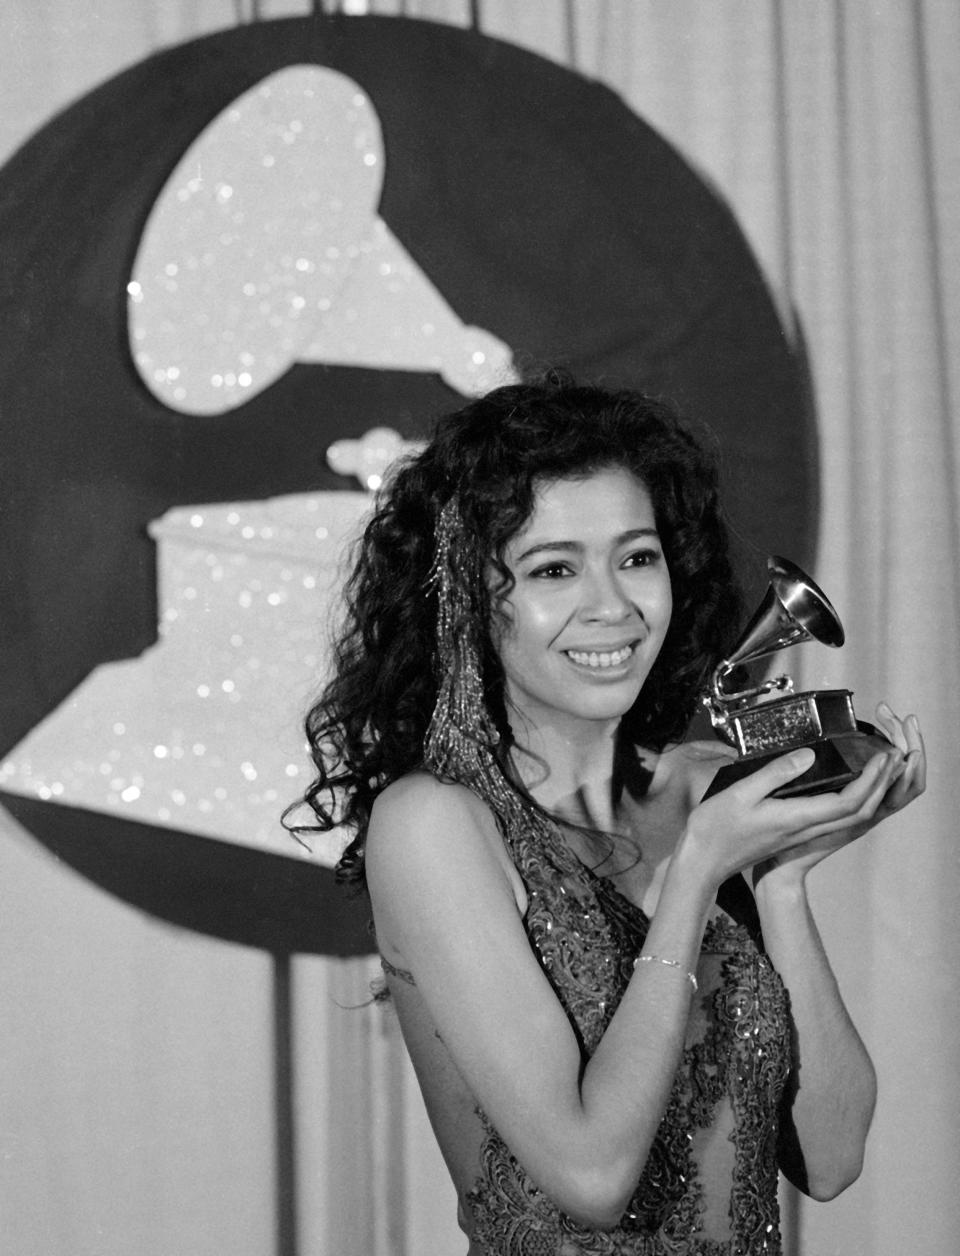 Irene Cara backstage during the 26th Annual Grammy Awards at the Shrine Auditorium, February 28, 1984 in Los Angeles, California.